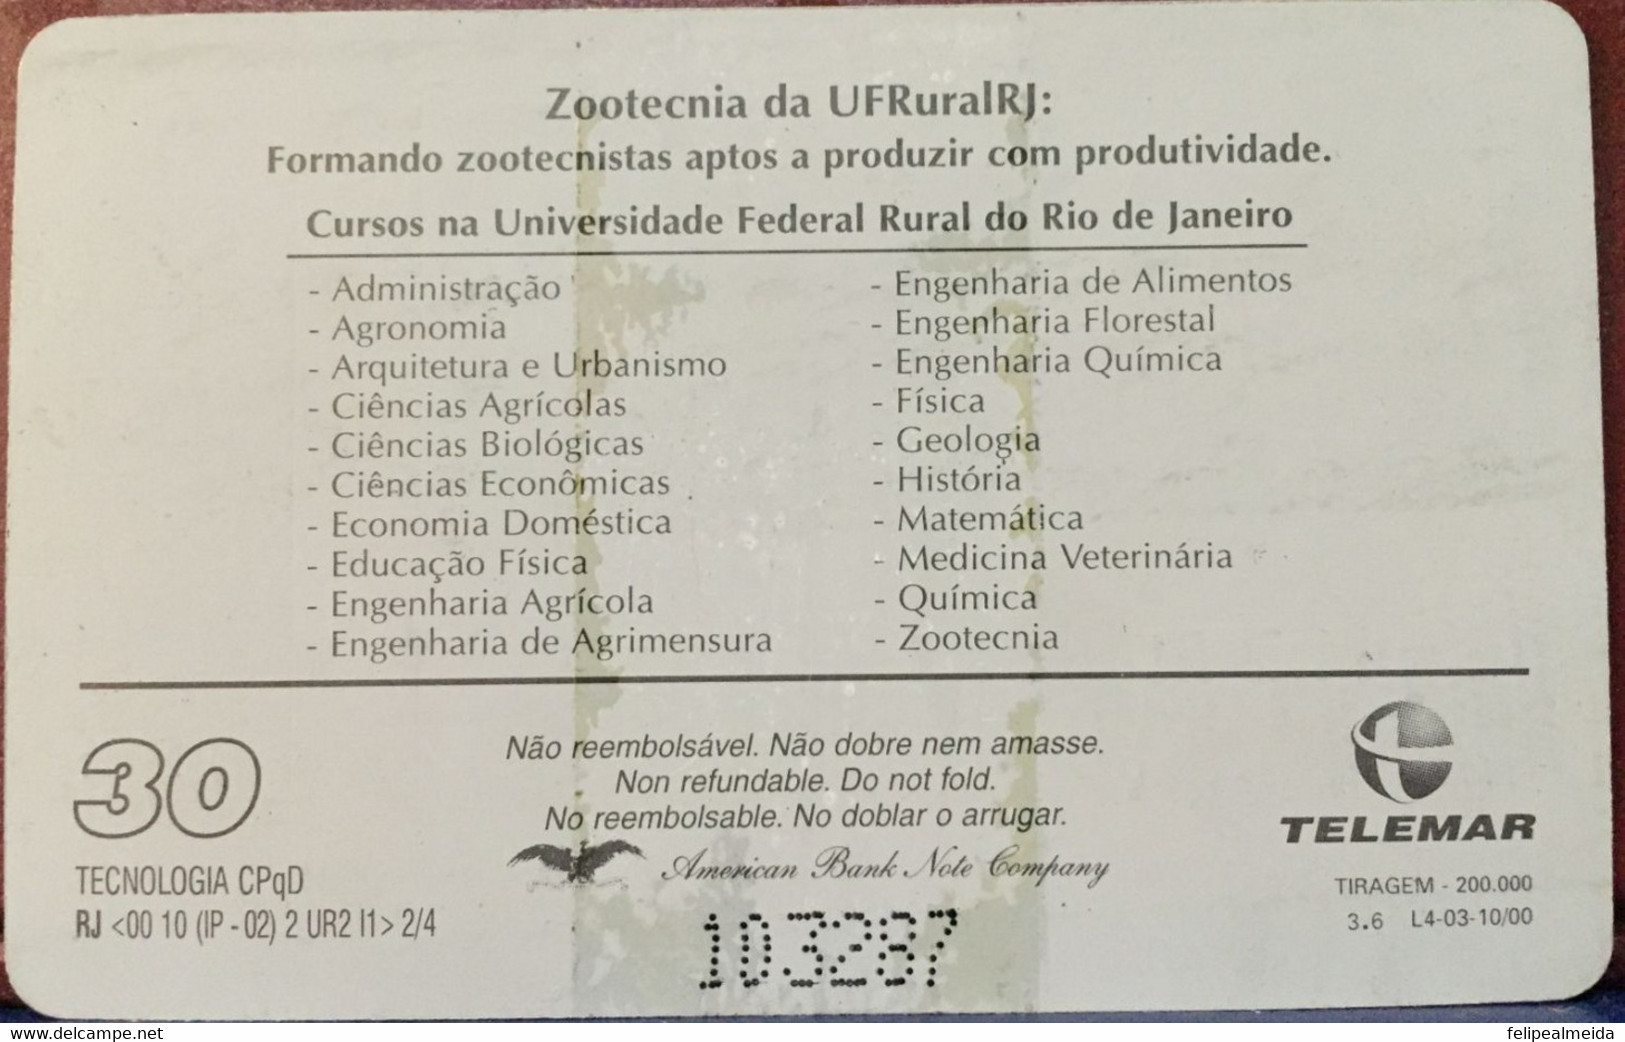 Phone Card Produced By Telemar In 2000 - Building Of The Animal Science Course At The Federal Rural University Of Rio De - Ontwikkeling